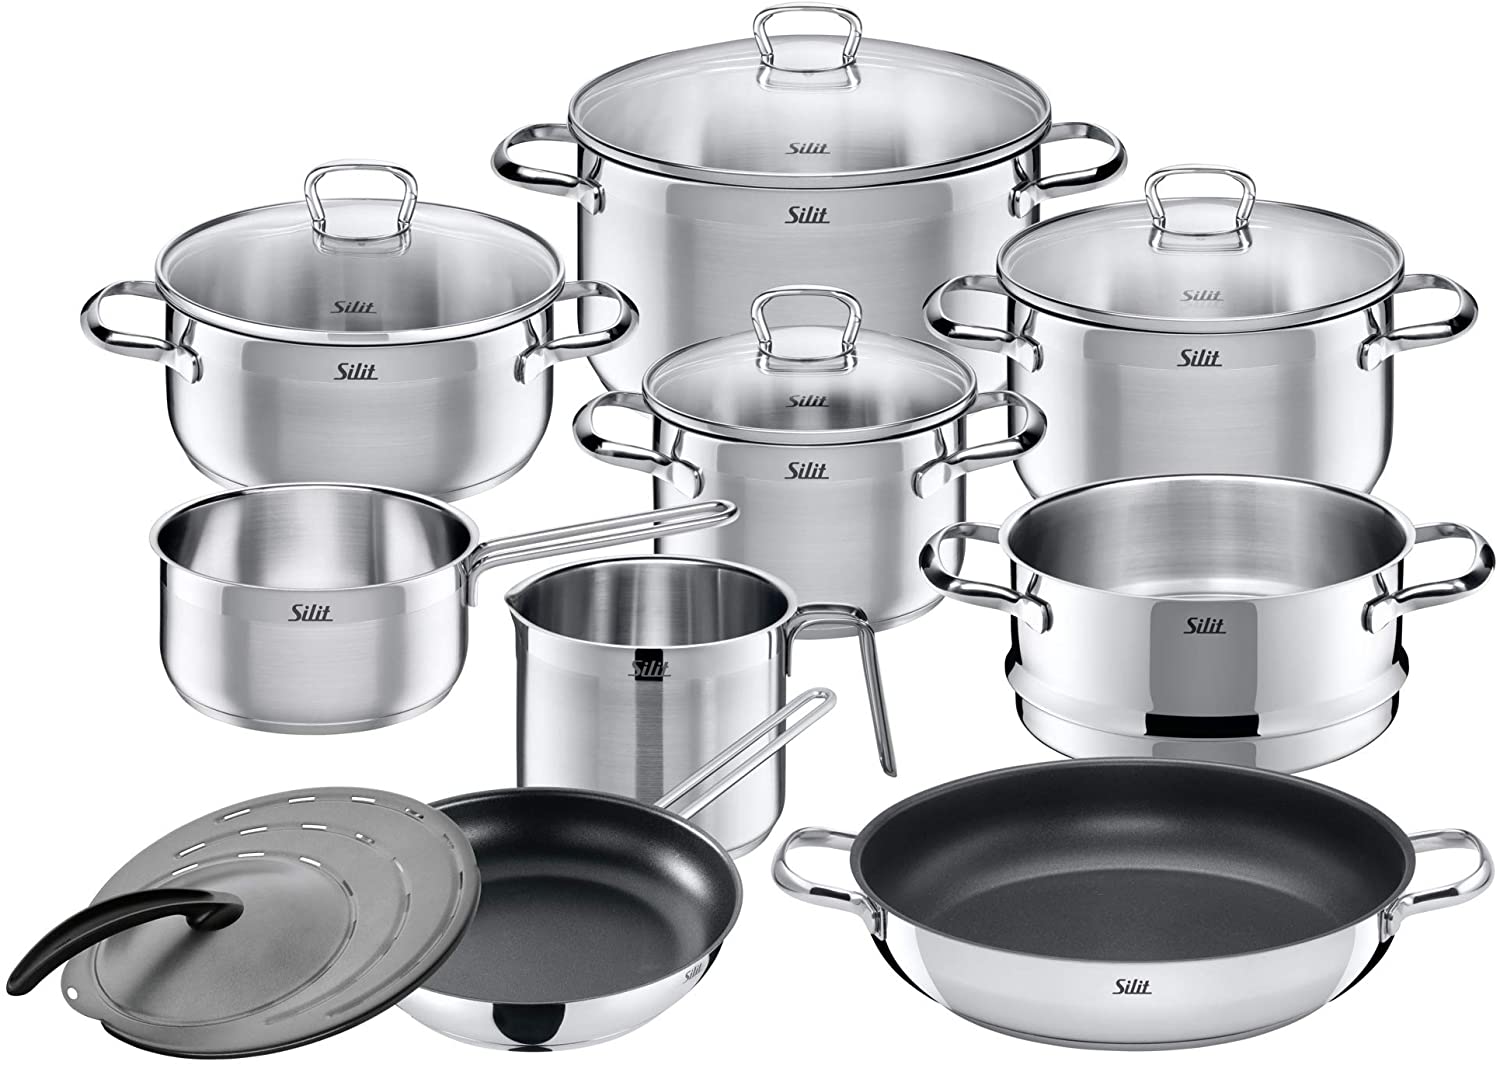 Silit Tuscany 10-Piece Induction Cooking Pot Set with Glass Lid, Milk Pan, Steamer, Pan, Stainless Steel, Partially Matte, Uncoated Pots Set